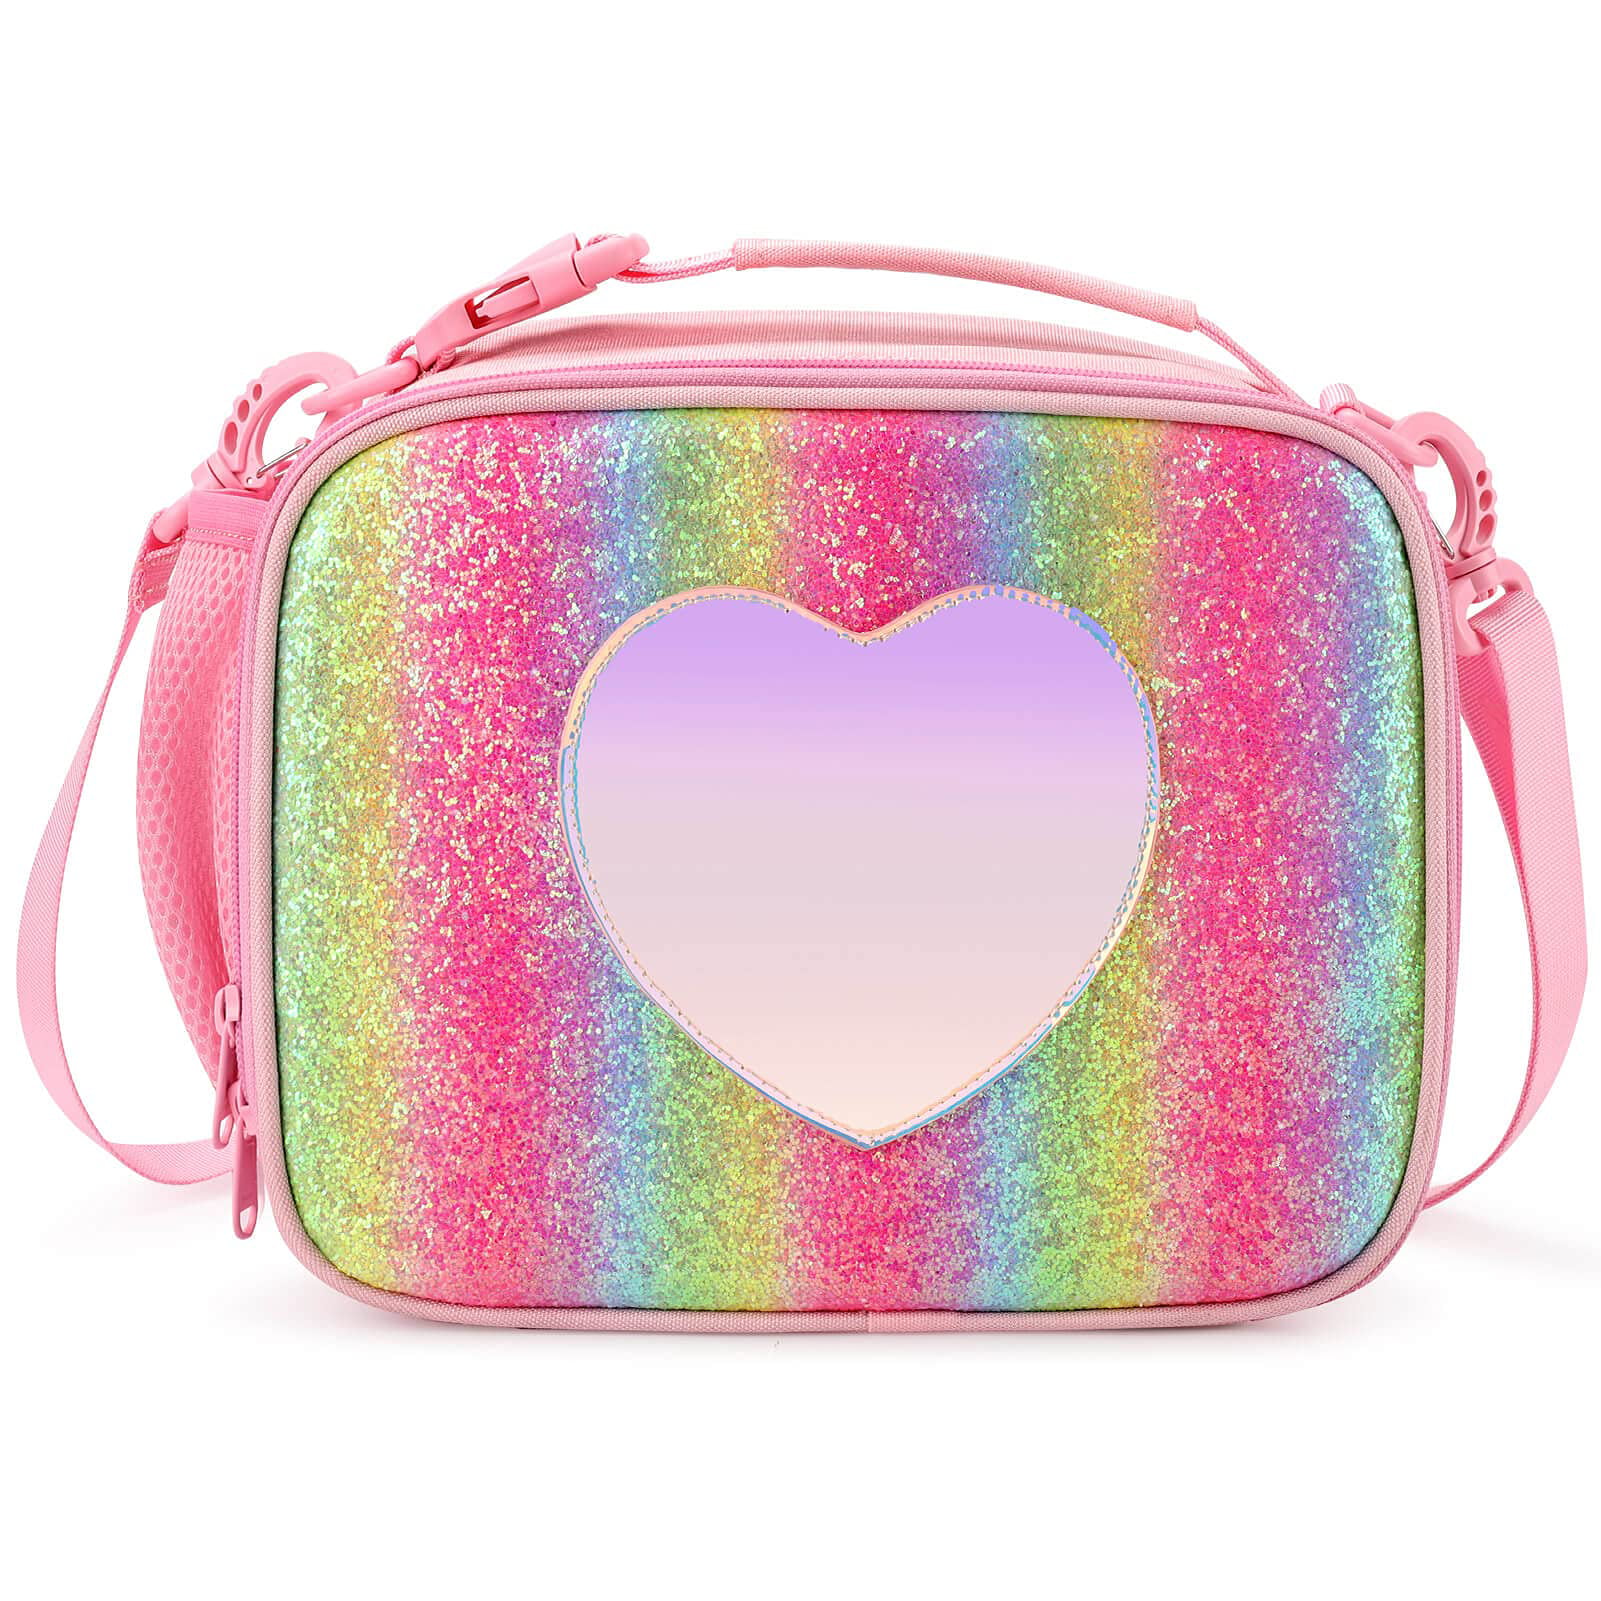 Ouryec Girls Rainbow Insulated Lunch Box, Aluminum, 11.1 in x 8.6 in x 4.3  in